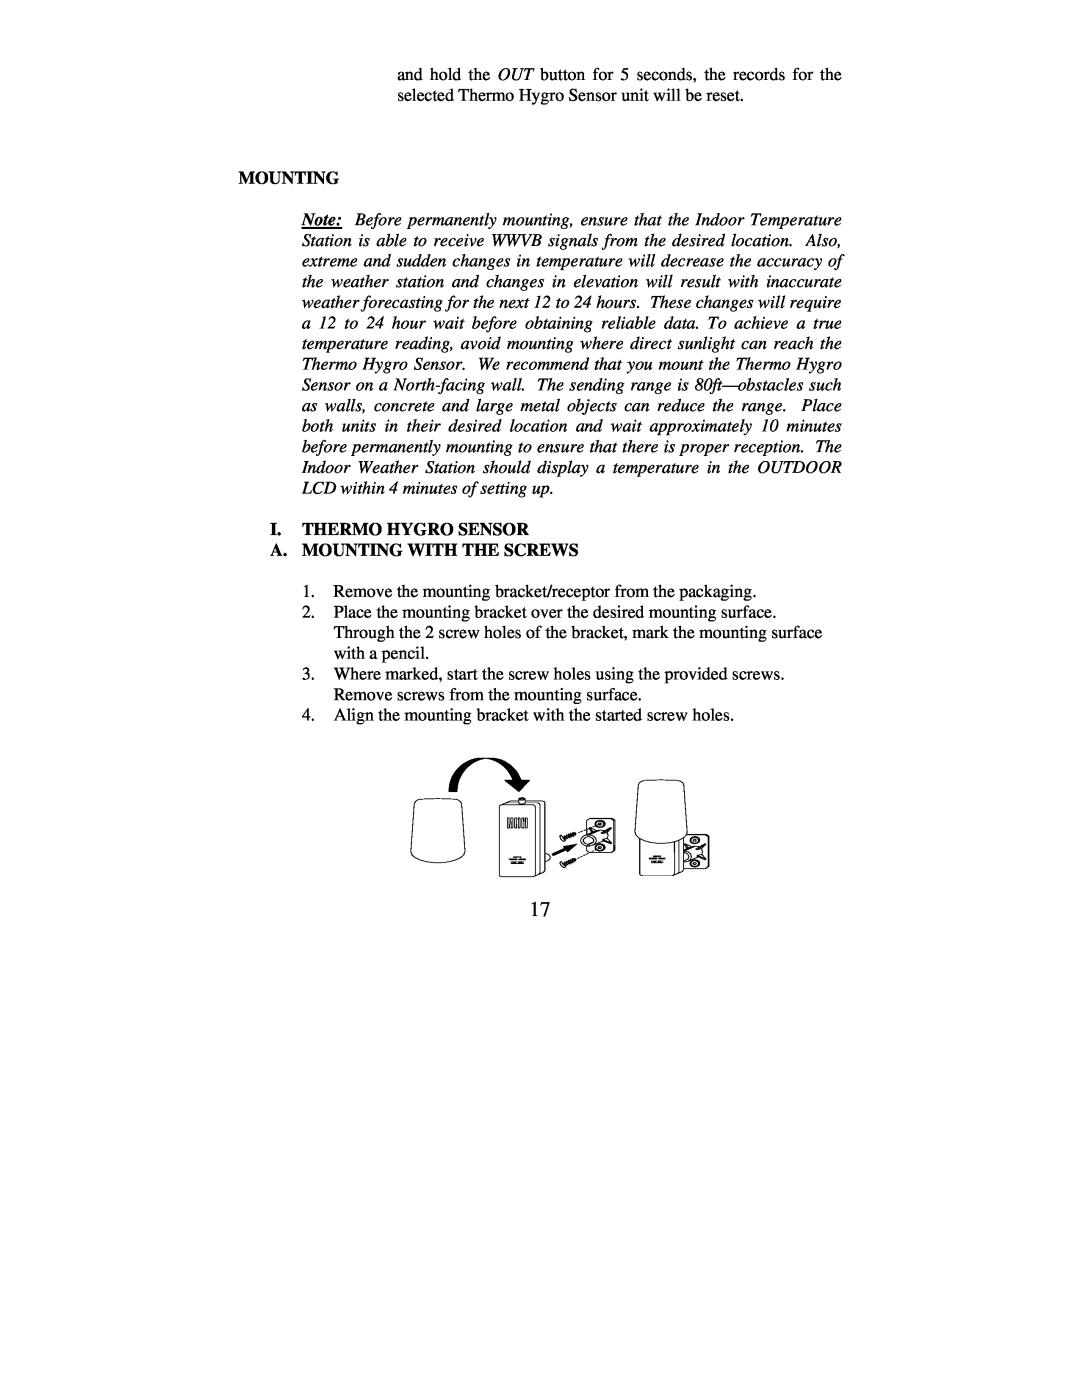 La Crosse Technology WS-7026U instruction manual I. Thermo Hygro Sensor A. Mounting With The Screws 